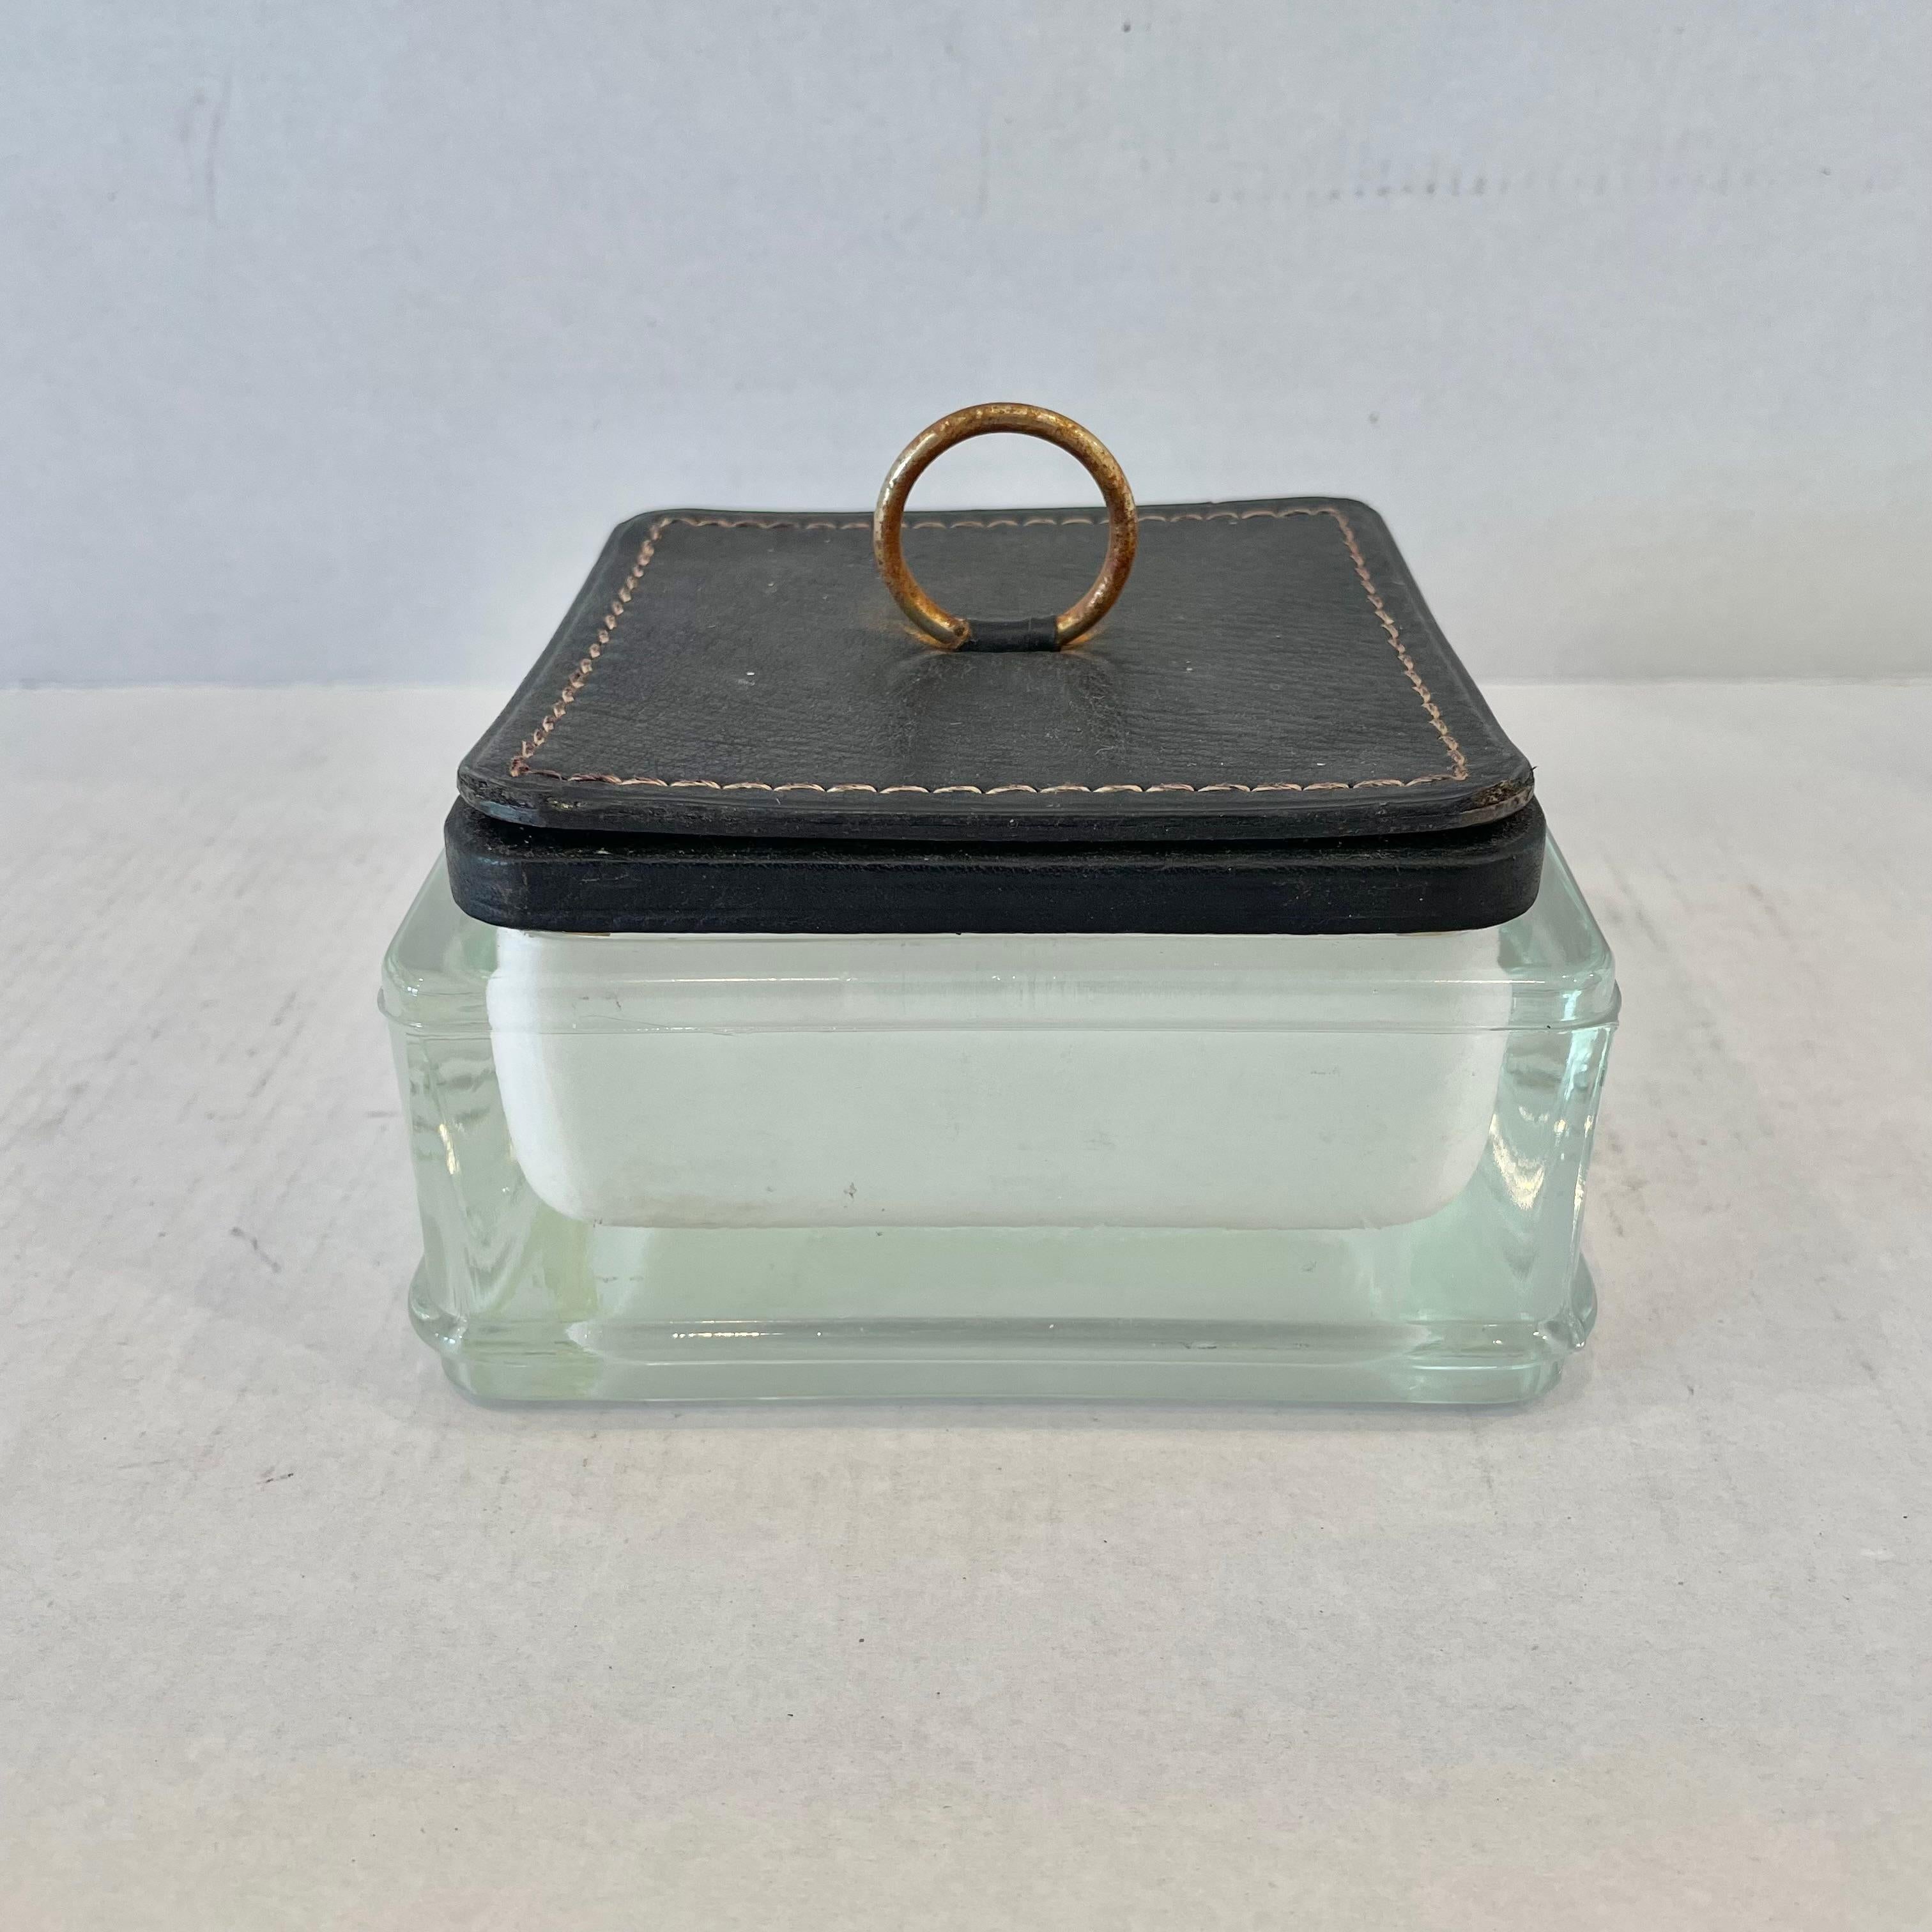 Substantial glass catchall / ashtray  with a leather lid in the style of French designer Jacques Adnet. Thick frosted glass body with a lid made of black leather with contrast stitching around the edges. Lid also features a metal ring attached to